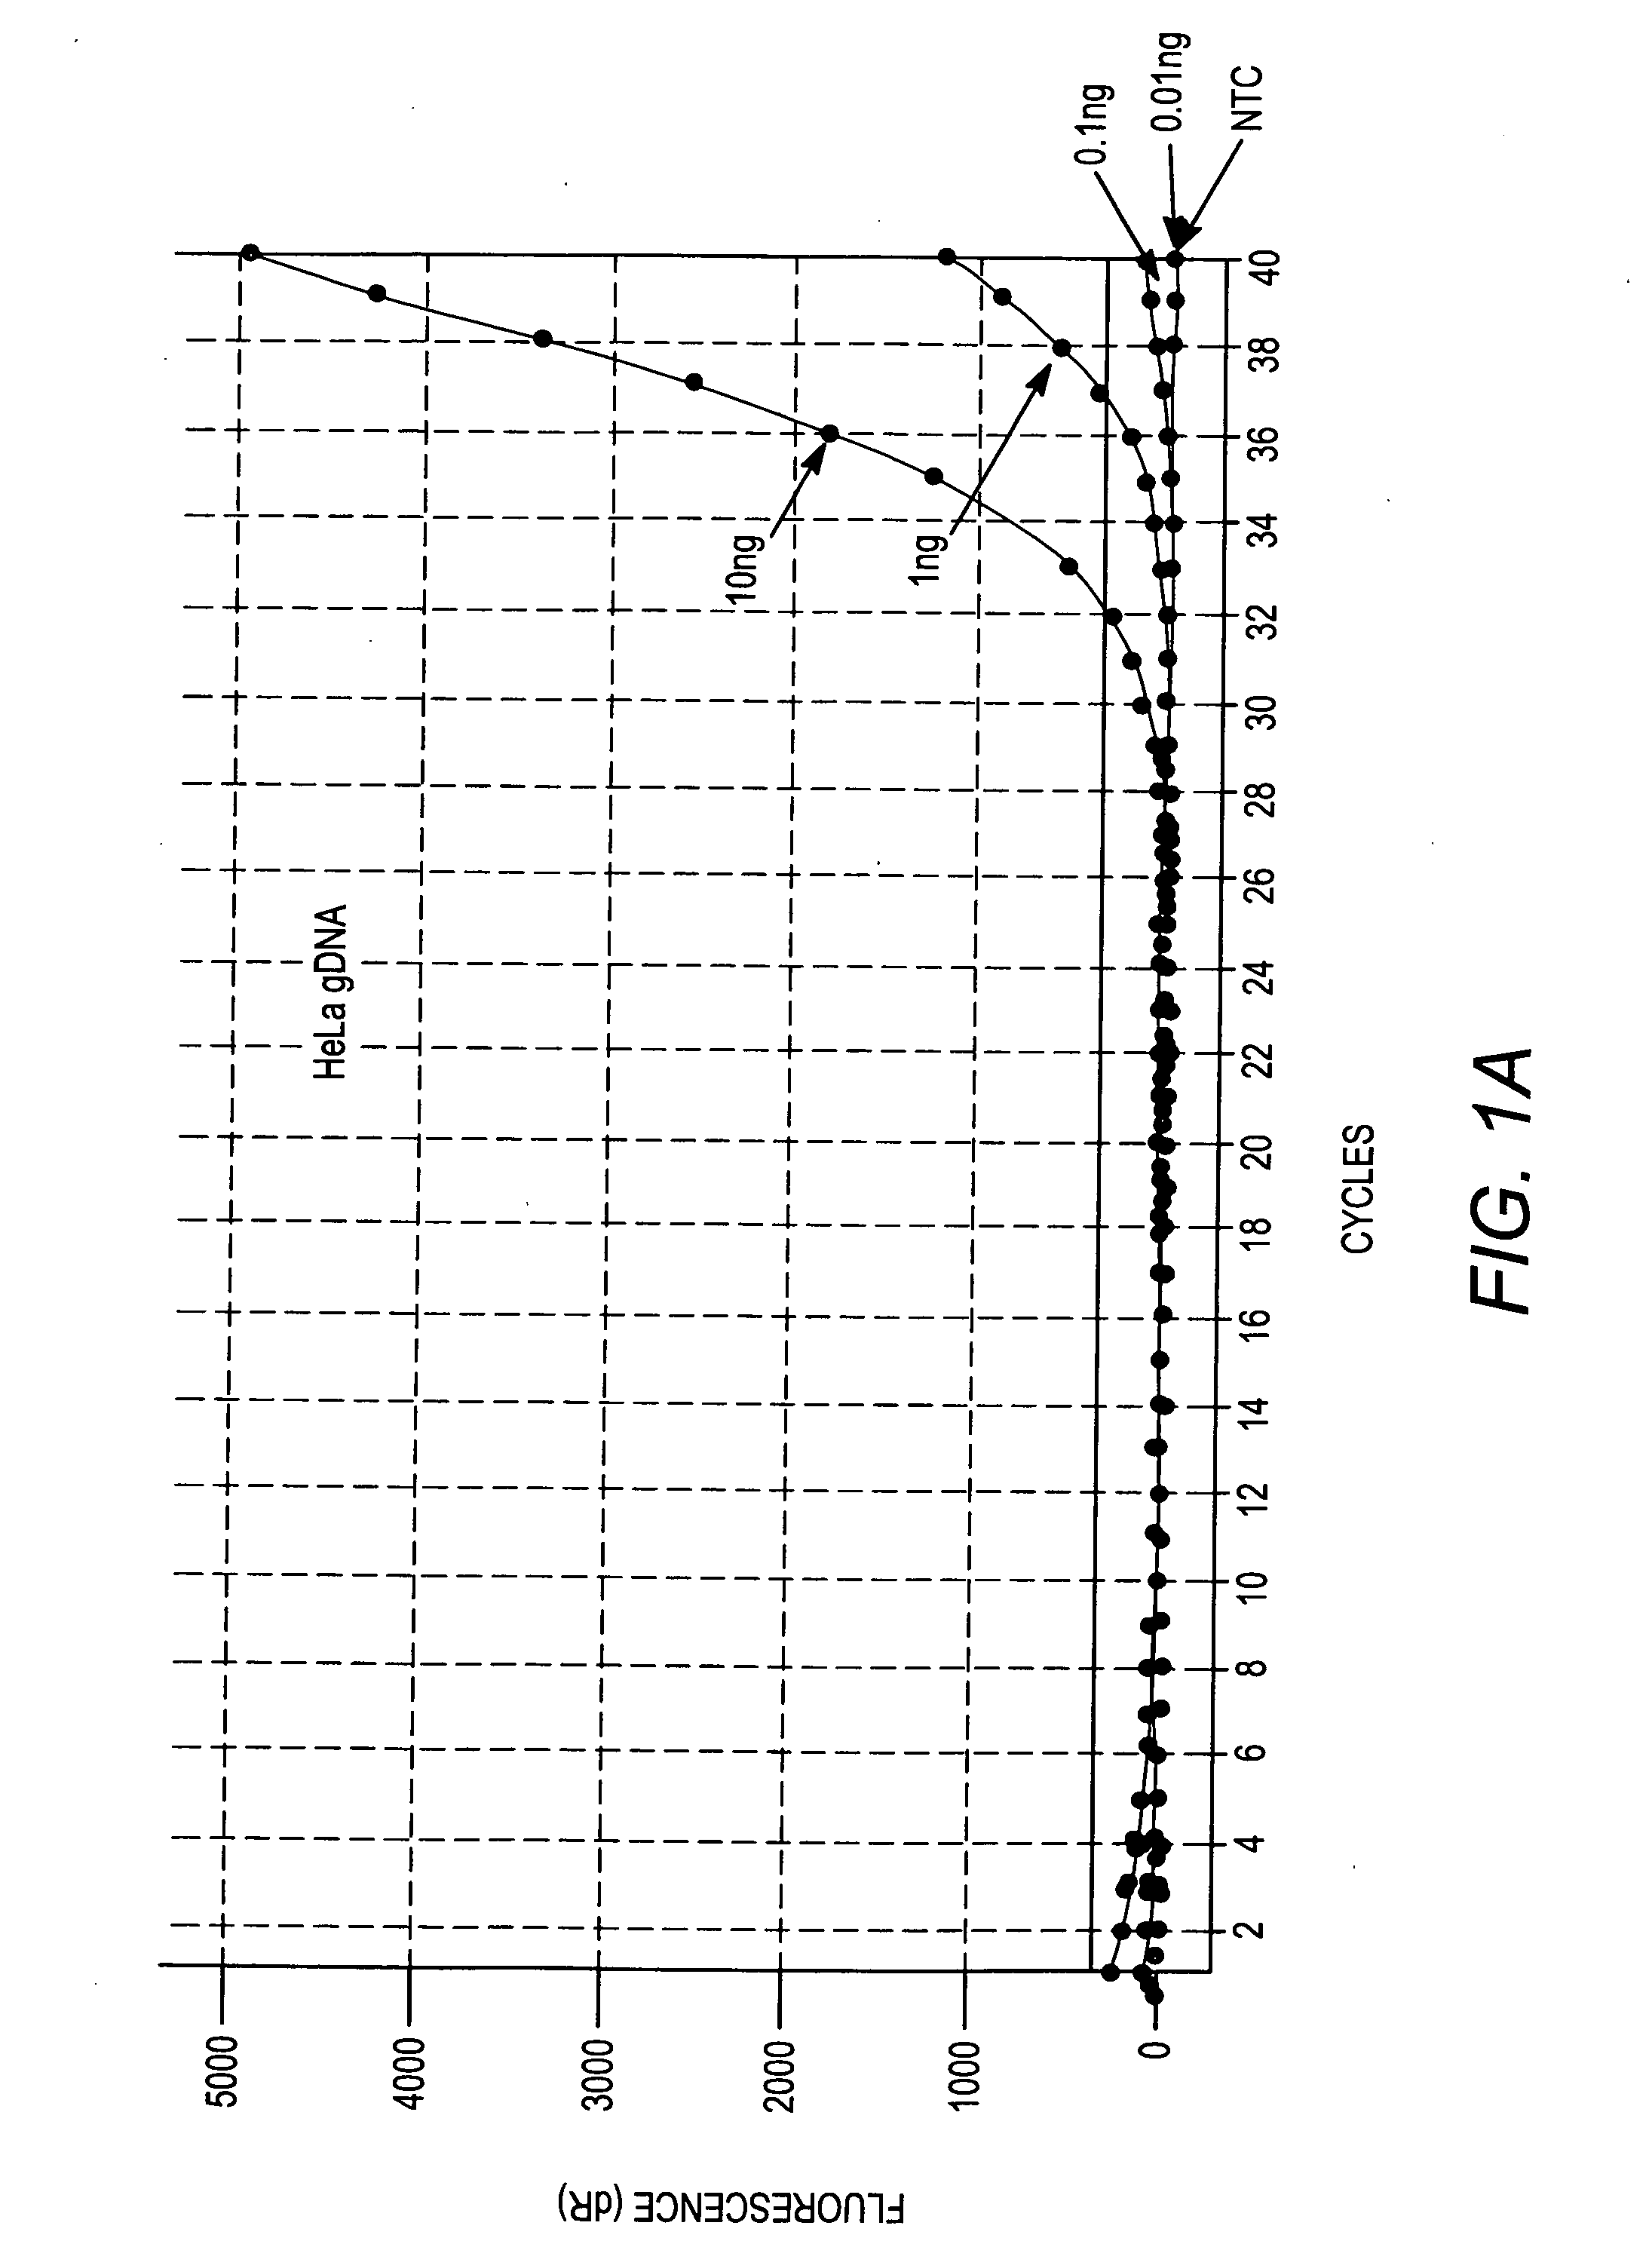 Normalization of samples for amplification reactions